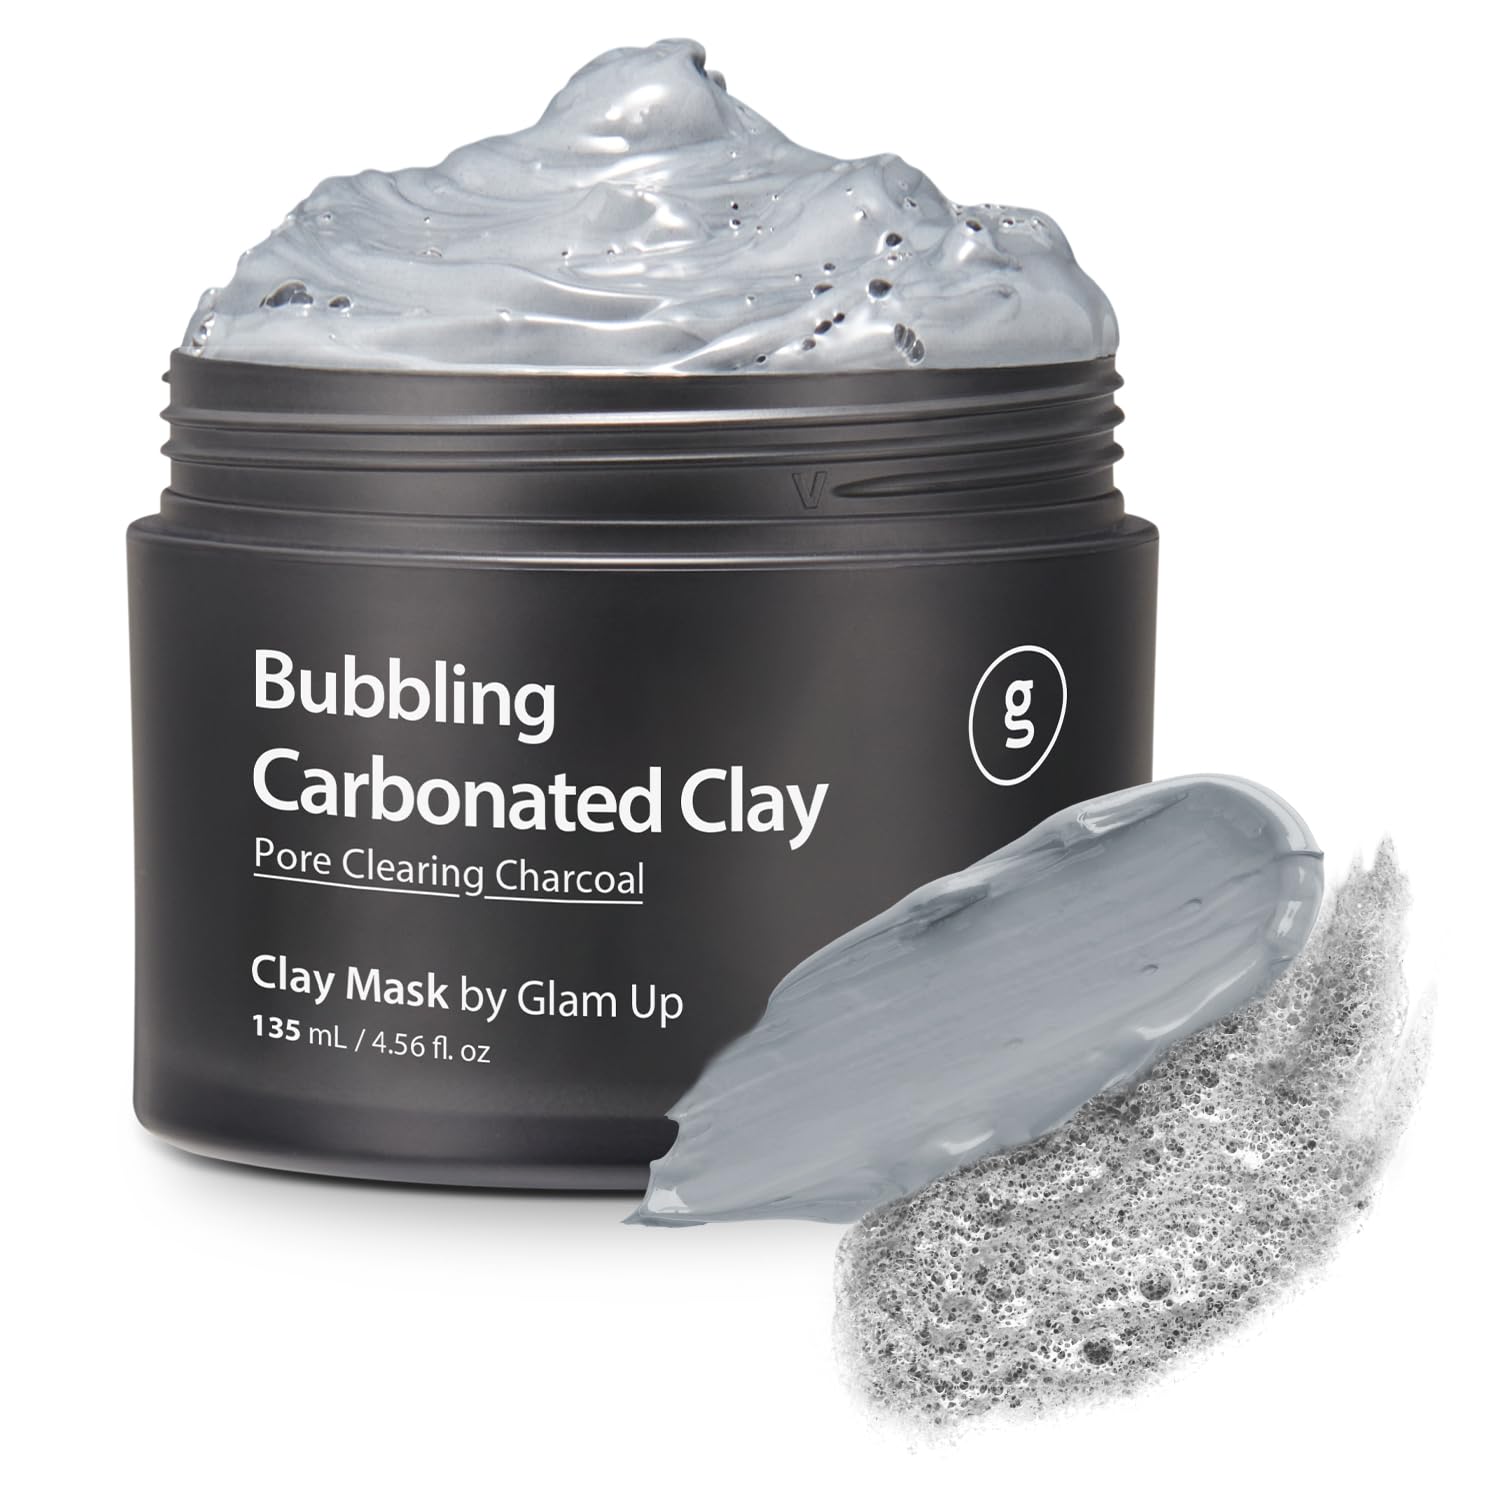 GLAM UP Bubbling Carbonated Clay Mask for Face Purifying- Blackhead Remover, Peel Off, Pore Clearing, Deep Cleansing, Detoxing Bubble Clay Mask, Vegan 120ml (4.56 Fl Oz)